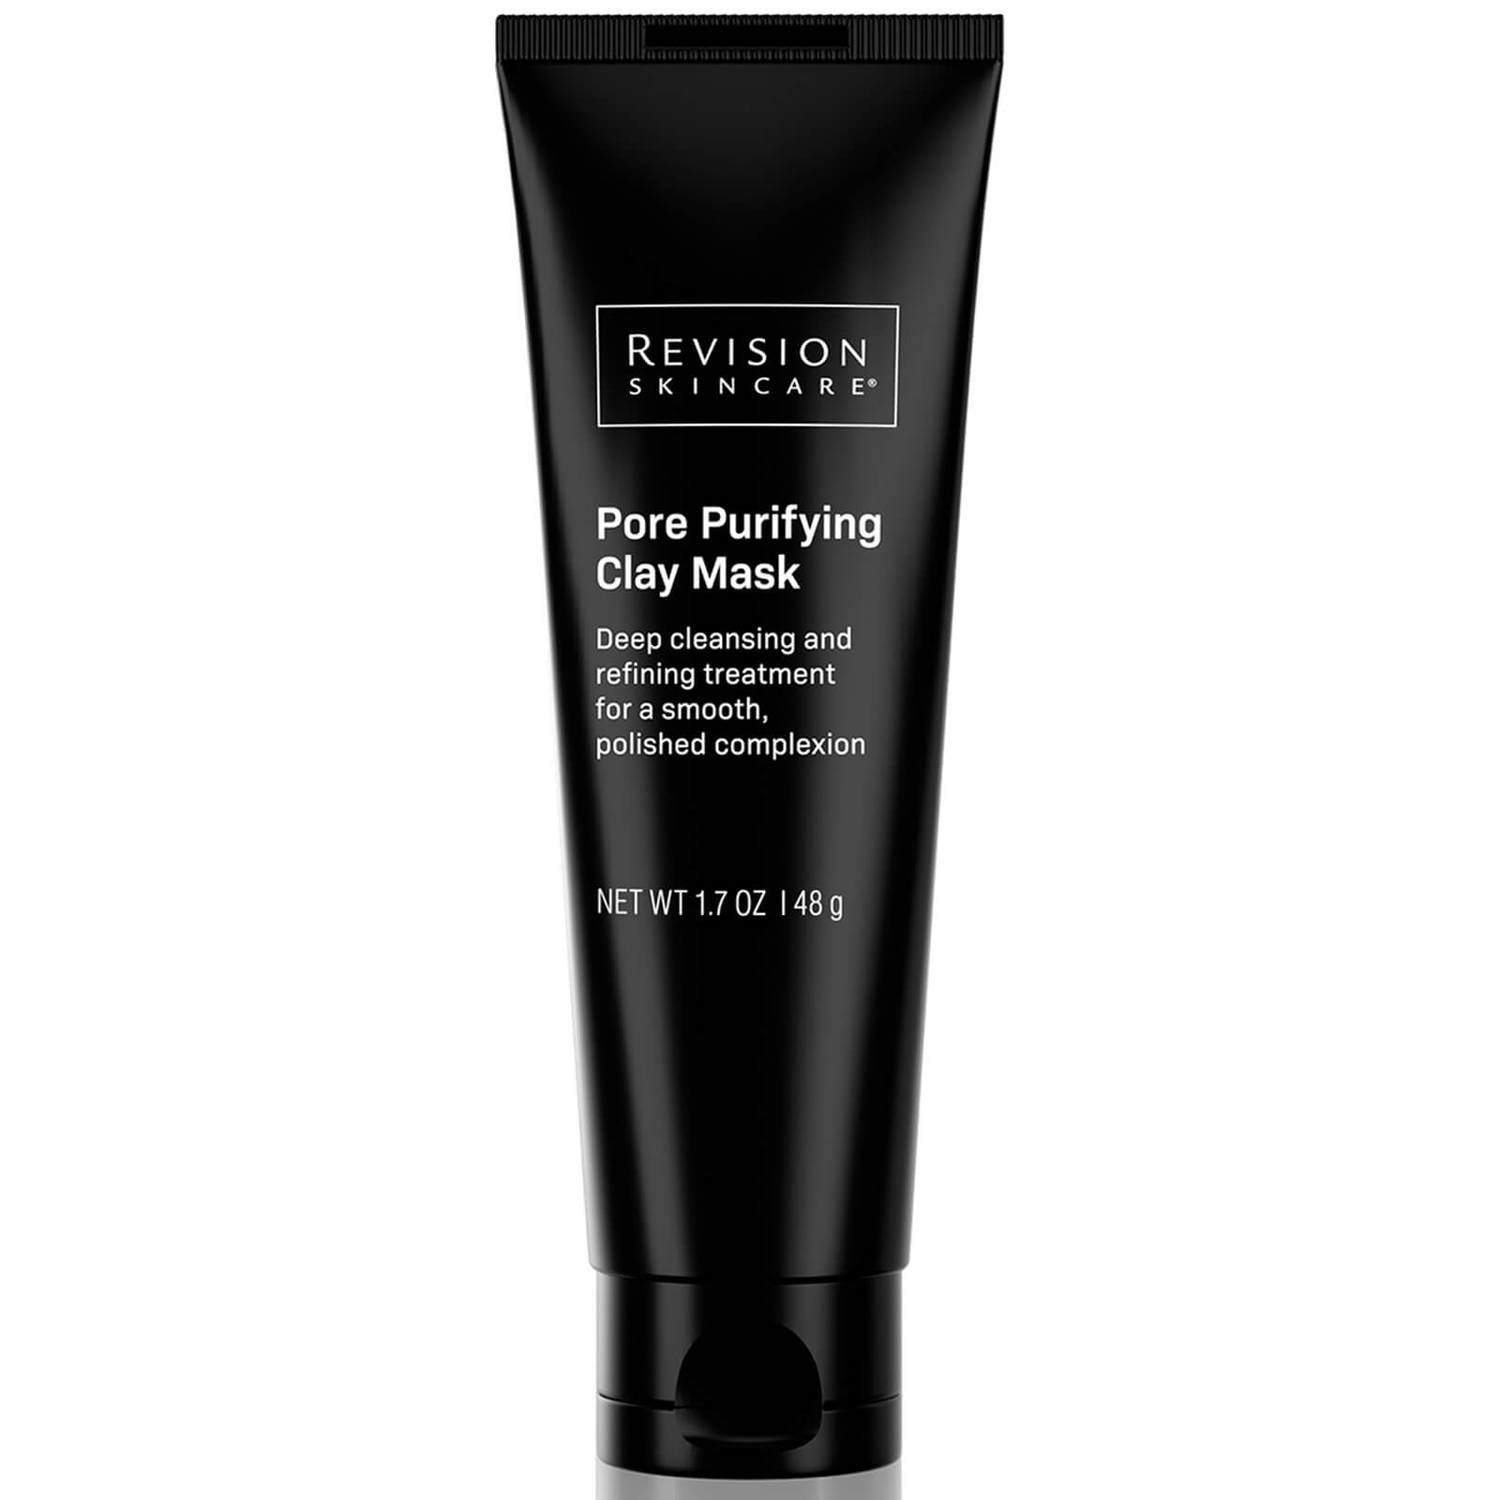 Revision Skincare® Pore Purifying Clay Mask 1.7 oz. | Dermstore (US)